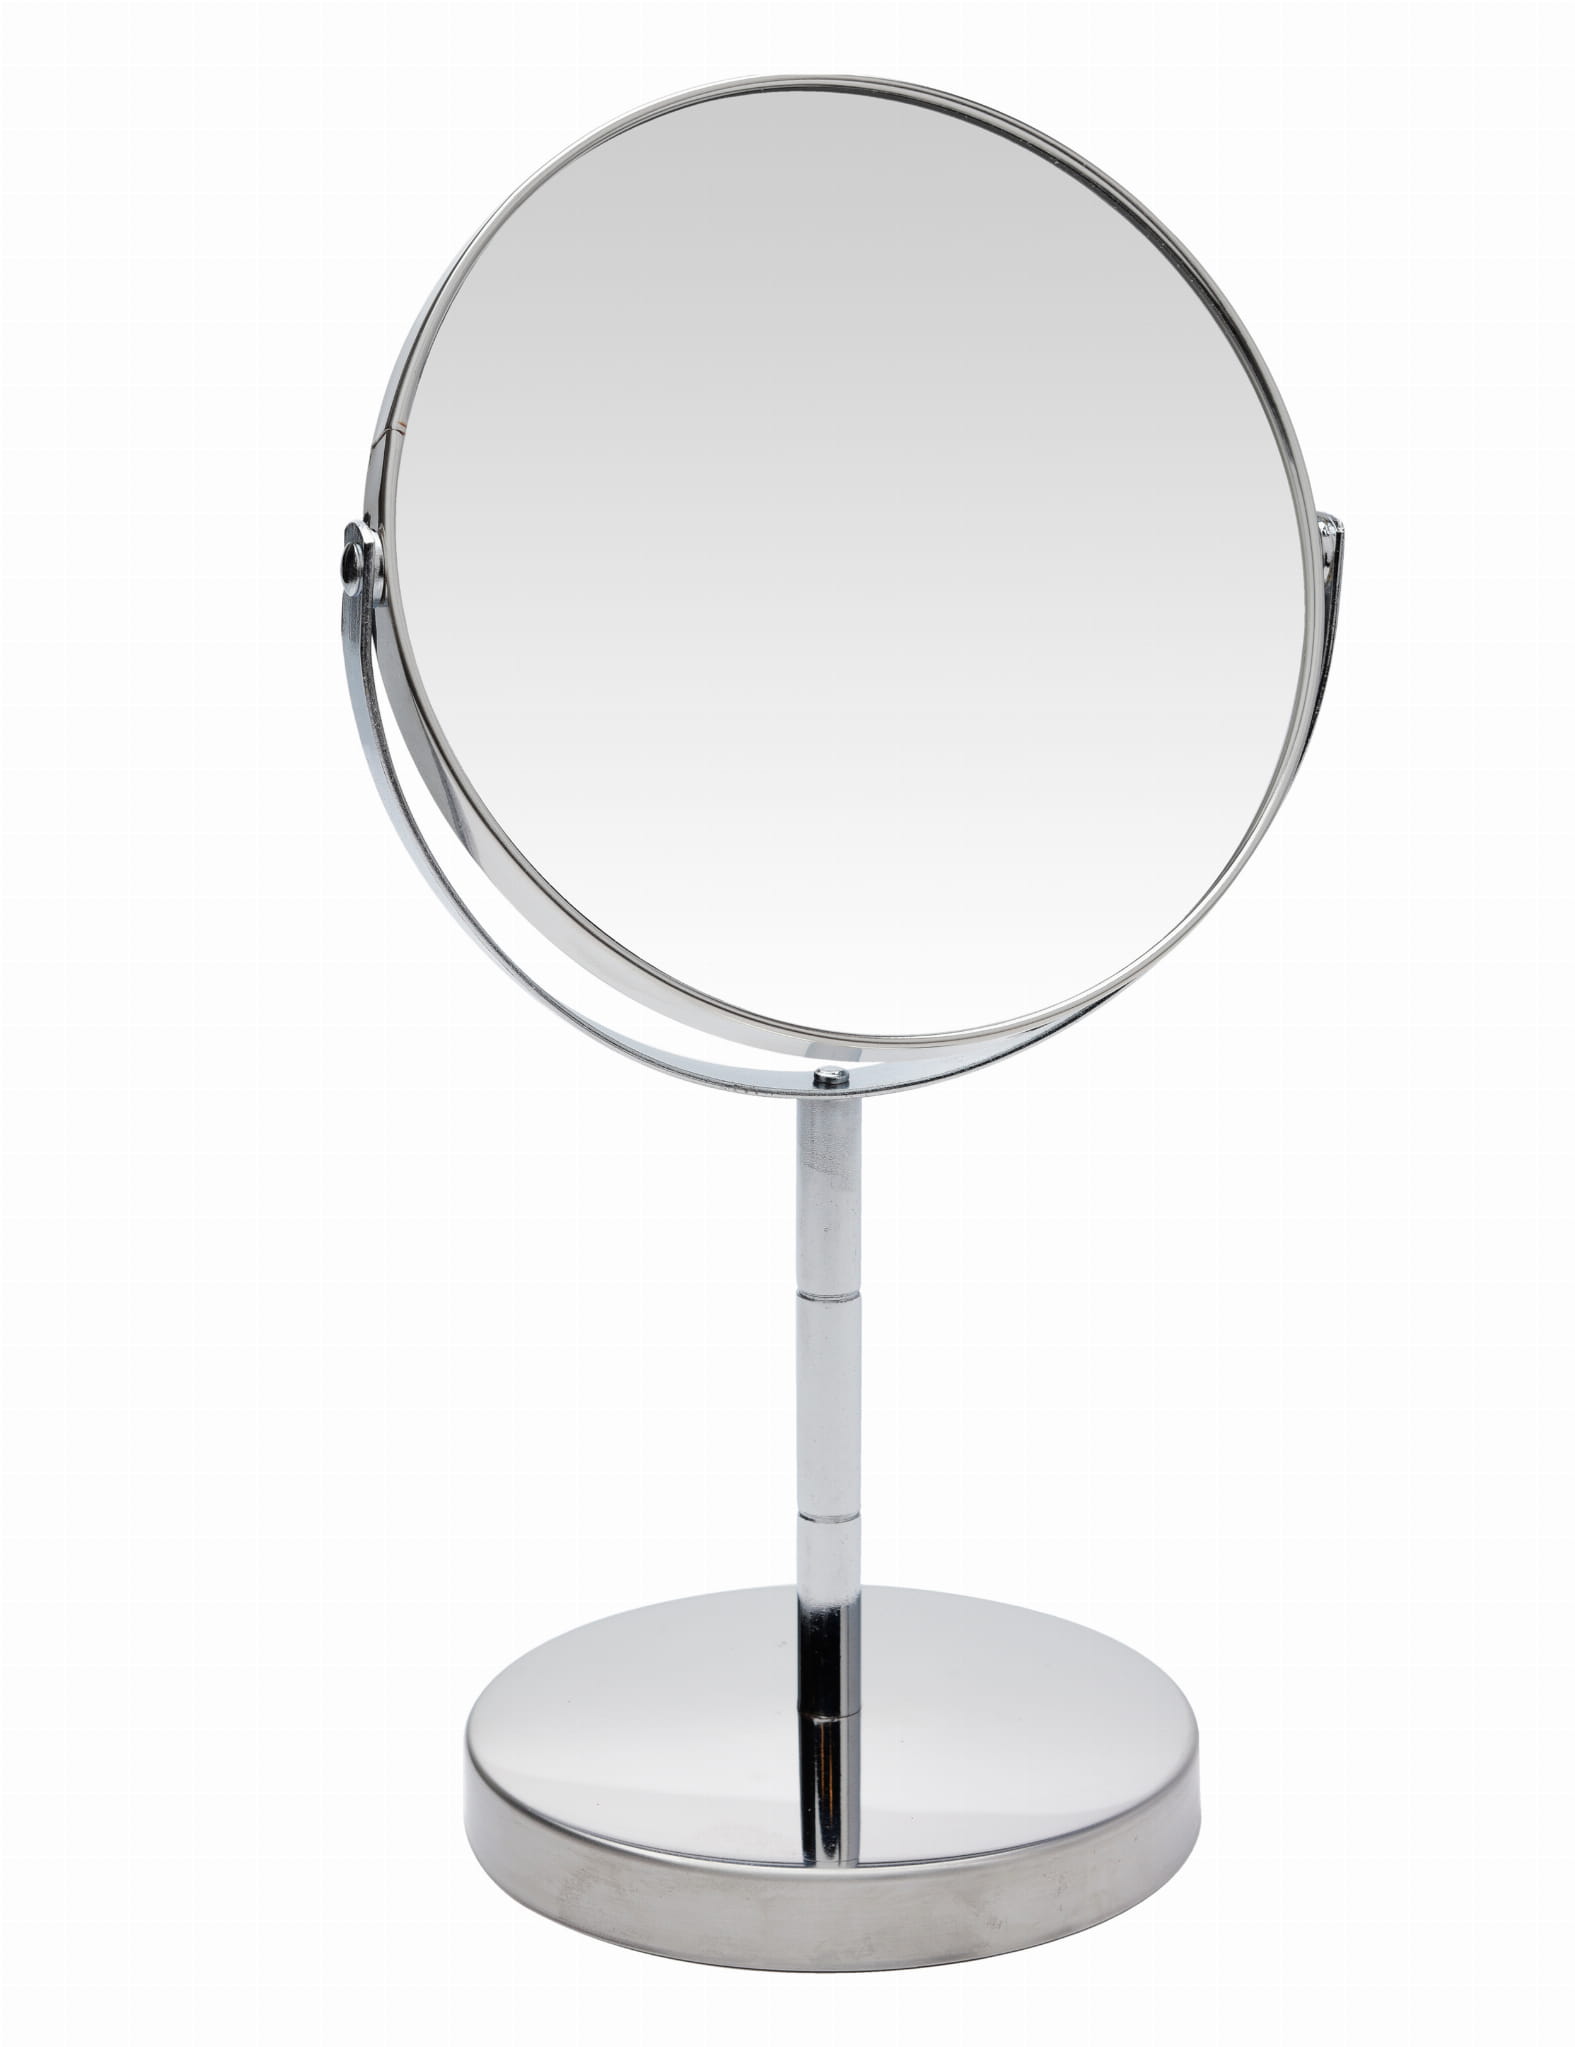 MIRROR ON METAL STAND 2 SIDED D14.2XH26.5CM